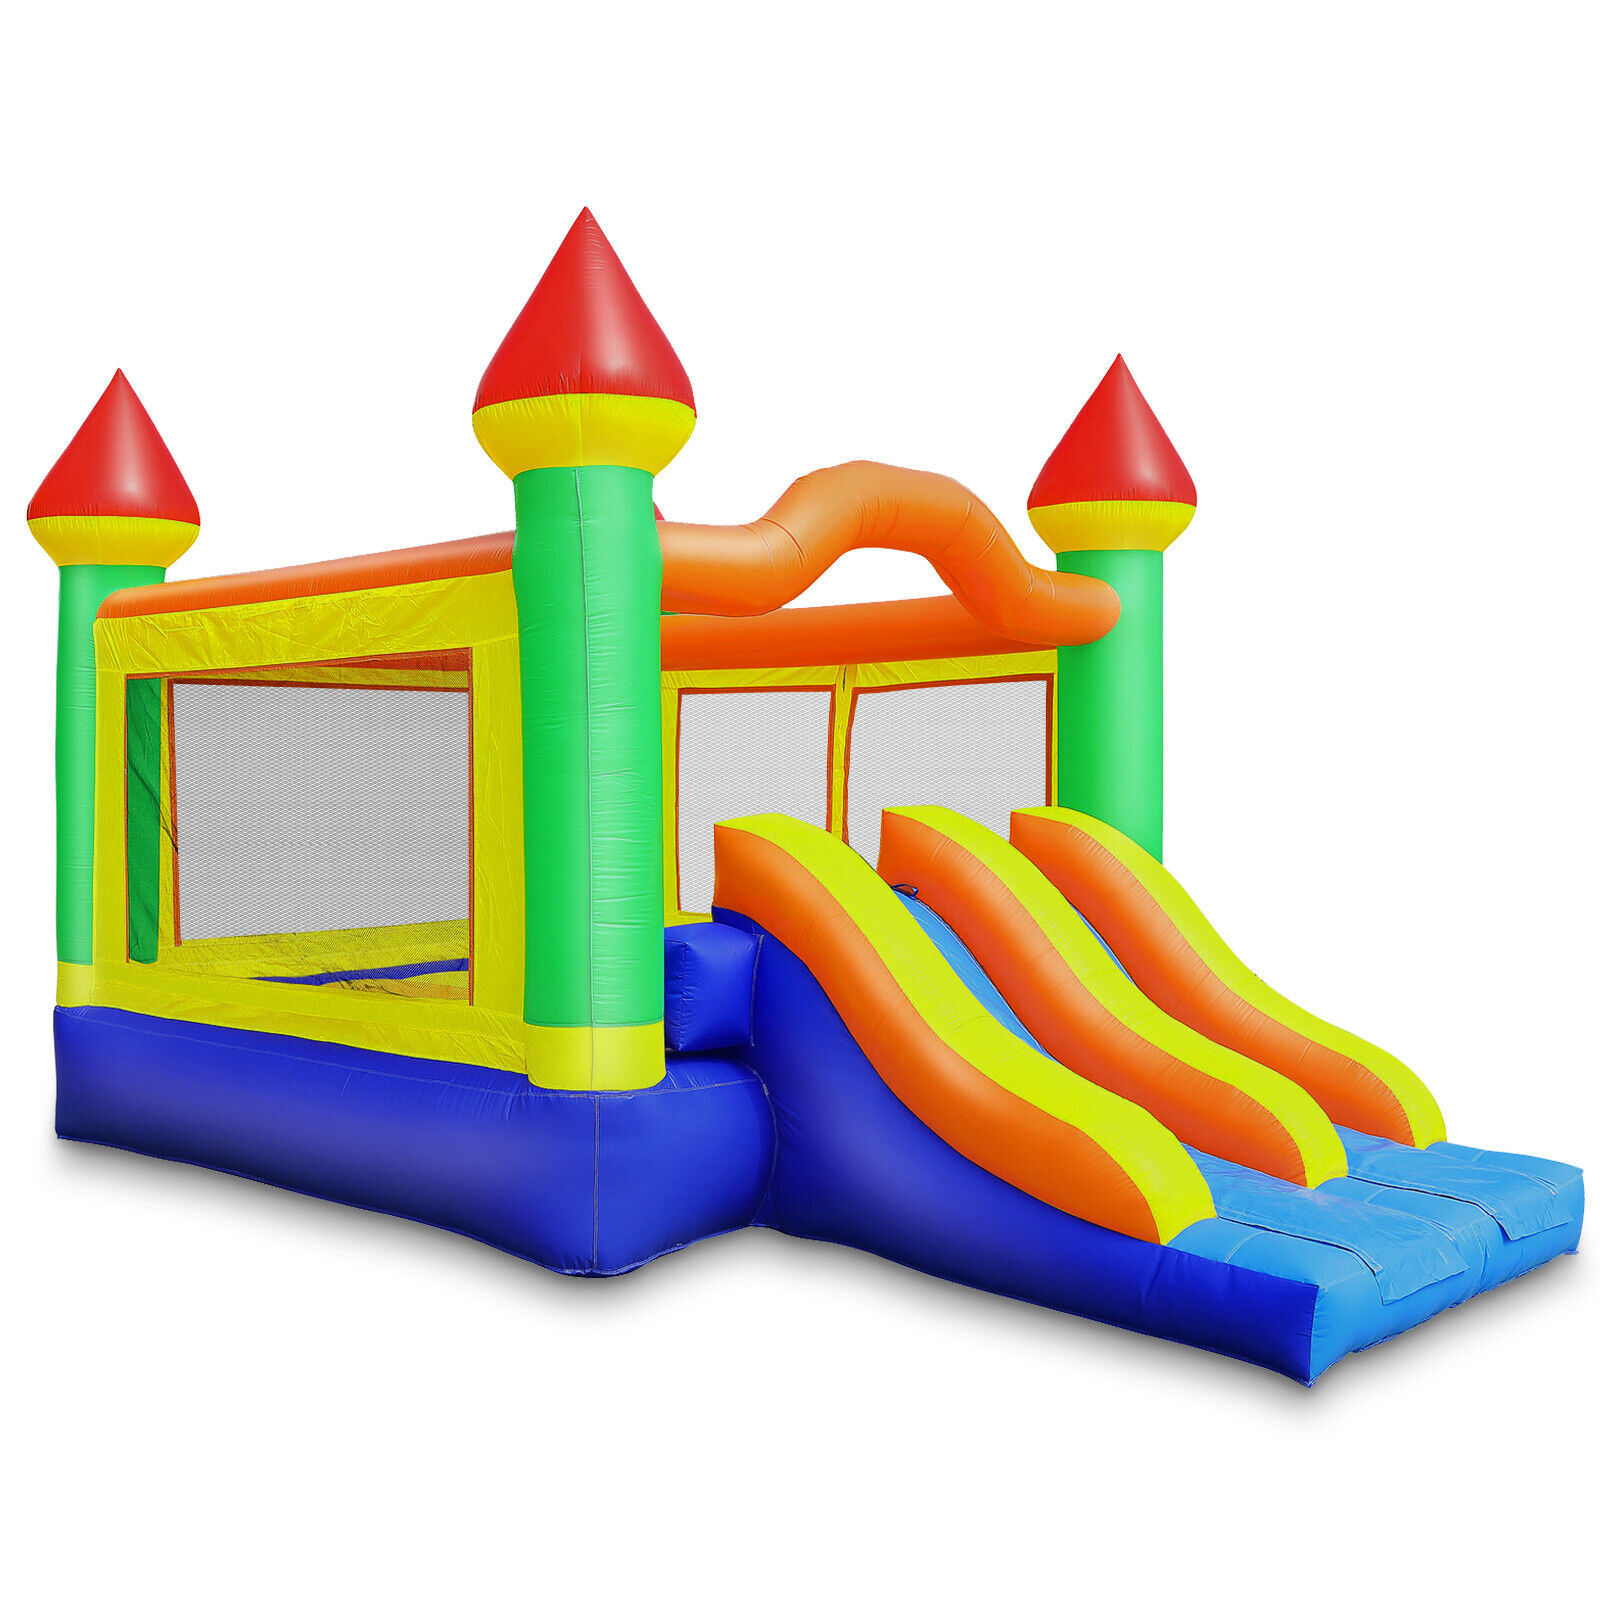 22'x15' Commercial Mega Slide Bounce House - 100% PVC Bouncer - Inflatable Only